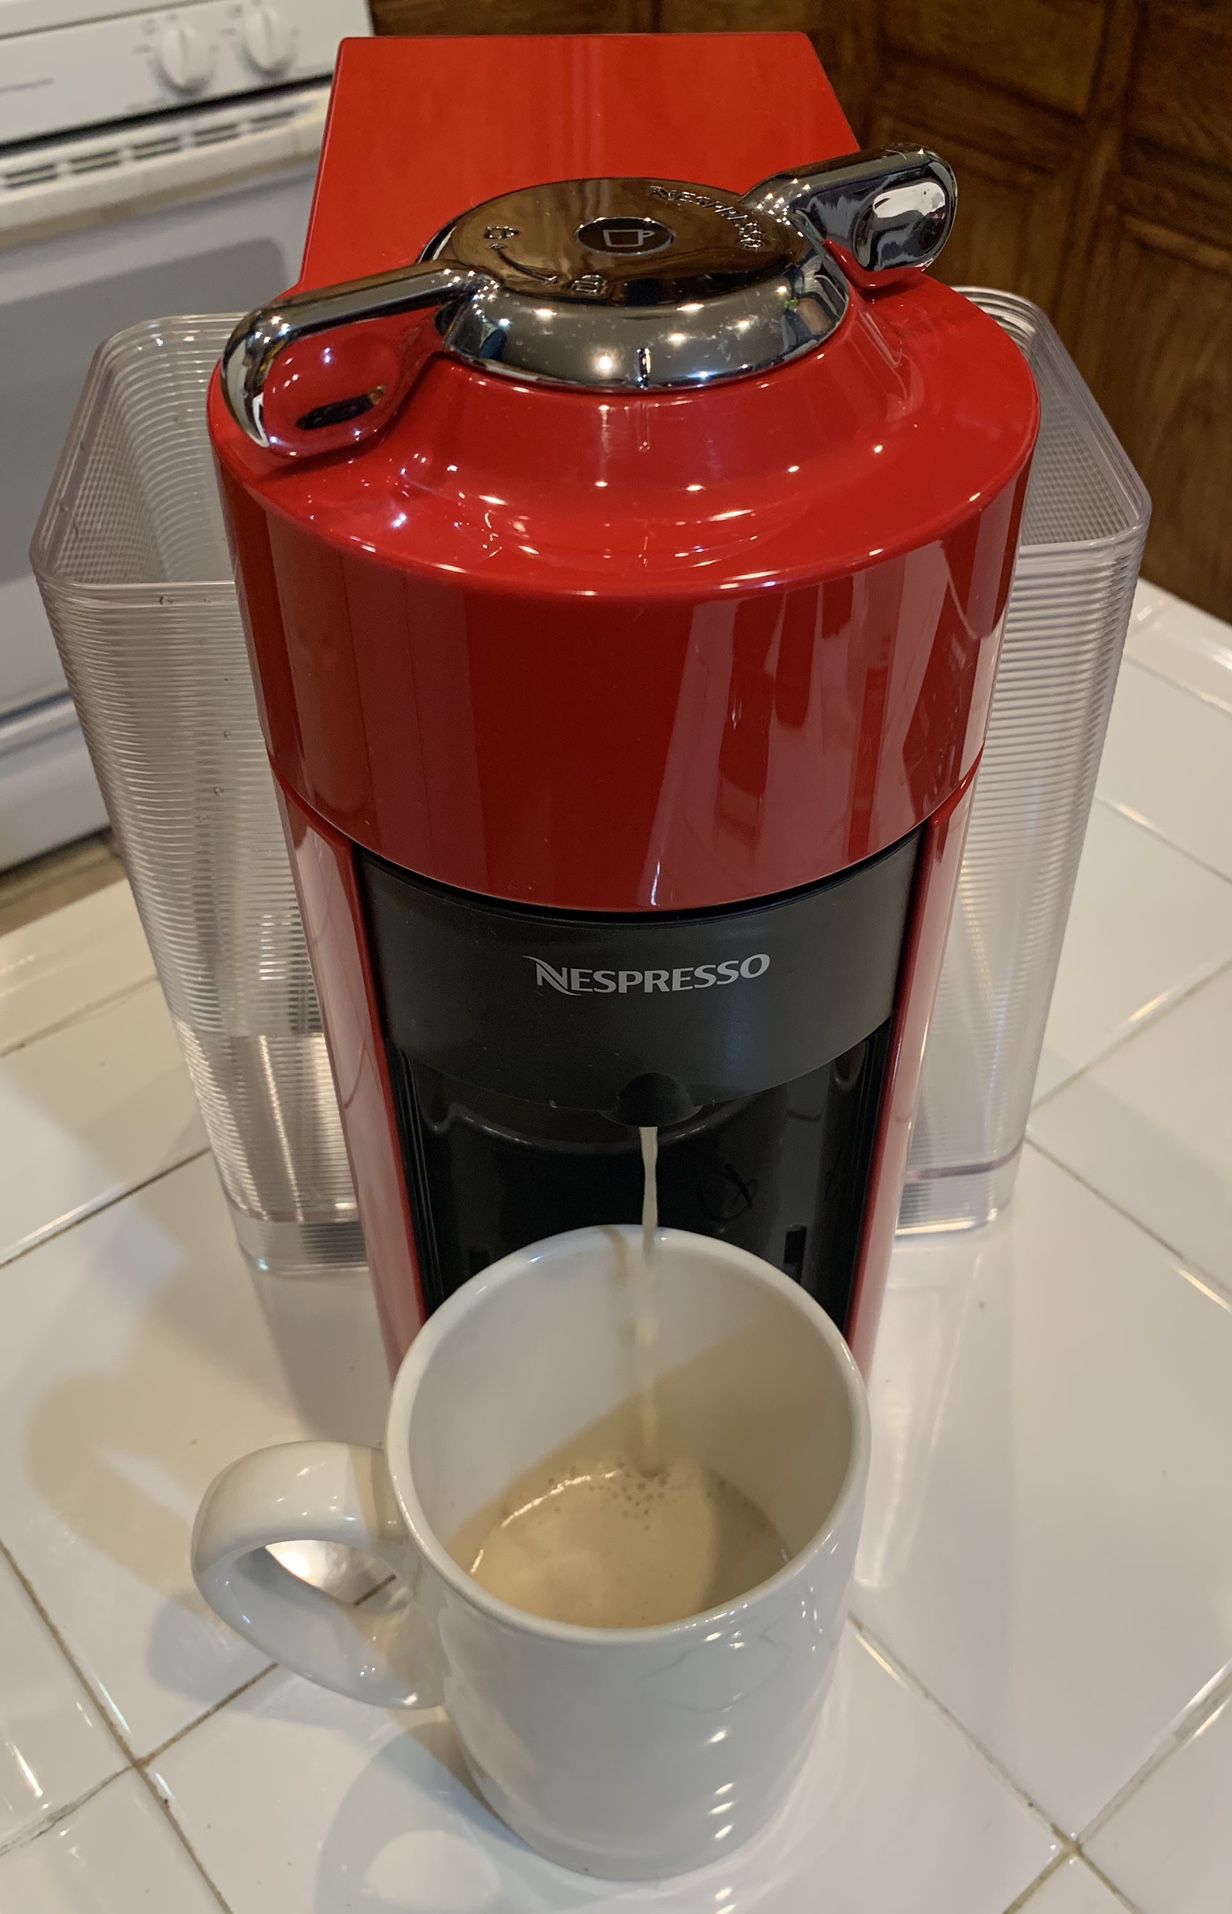 Breville Grind Control Coffee Maker for Sale in Issaquah, WA - OfferUp